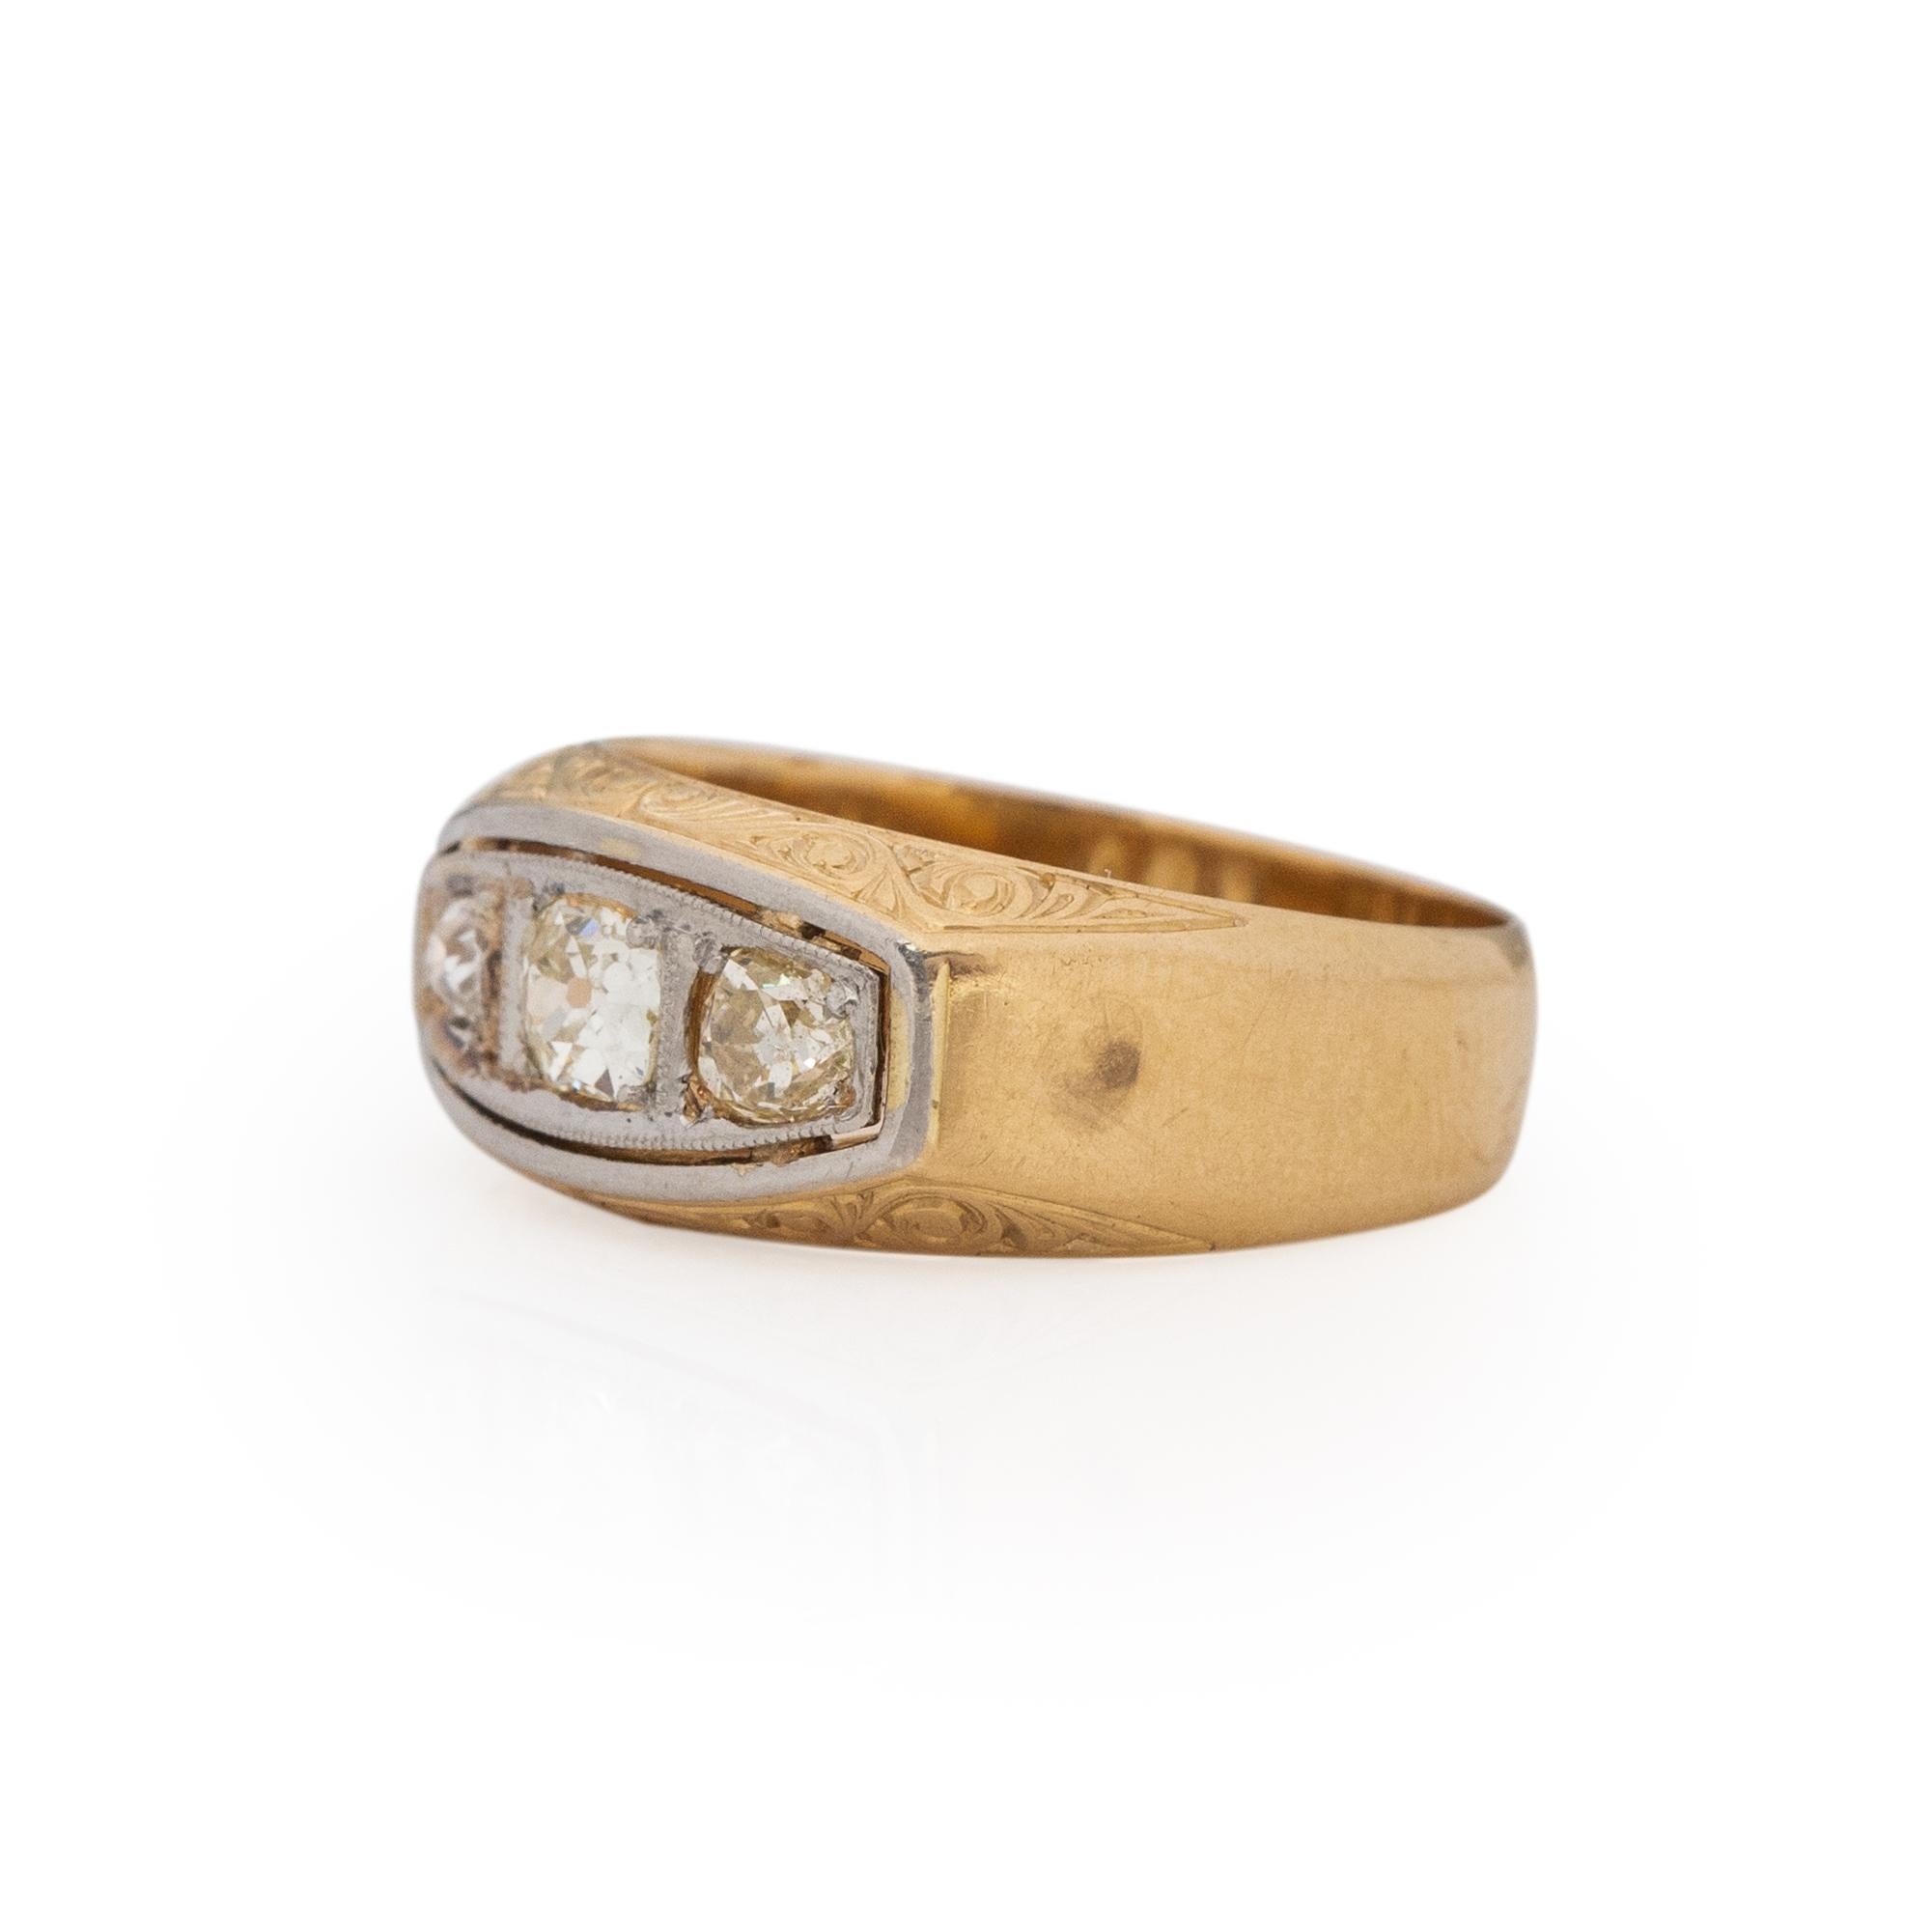 Here is something that we do not see all that often. A beautifully detailed unisex ring perfect for men or woman. Crafted in 18K white and yellow gold the simple wide band style of the shanks lead us to the white gold channel. Along the front and